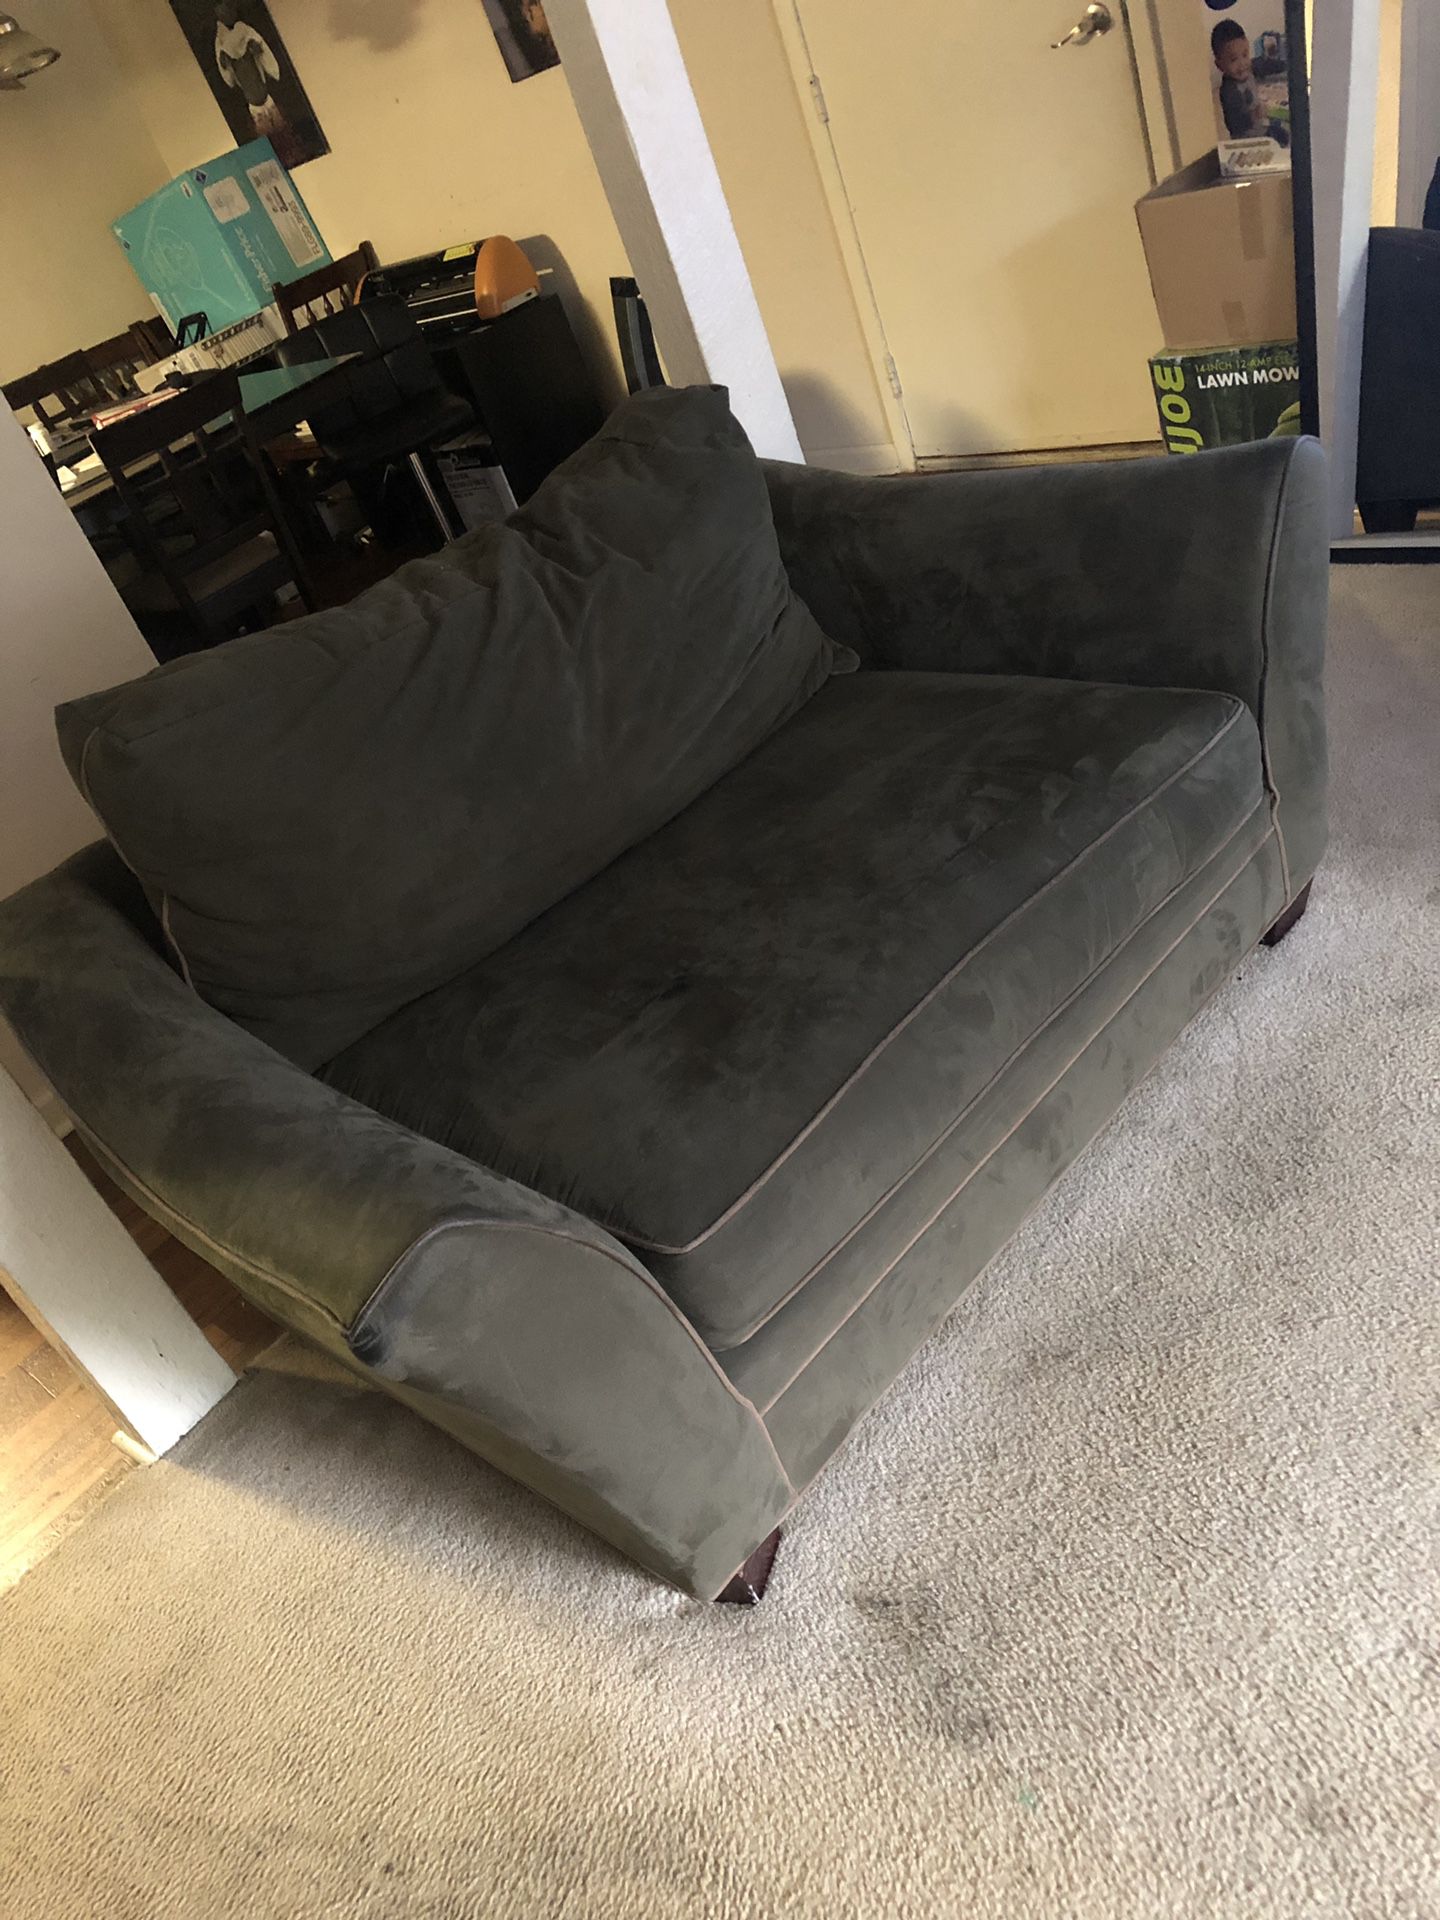 Army green couch must go by Friday